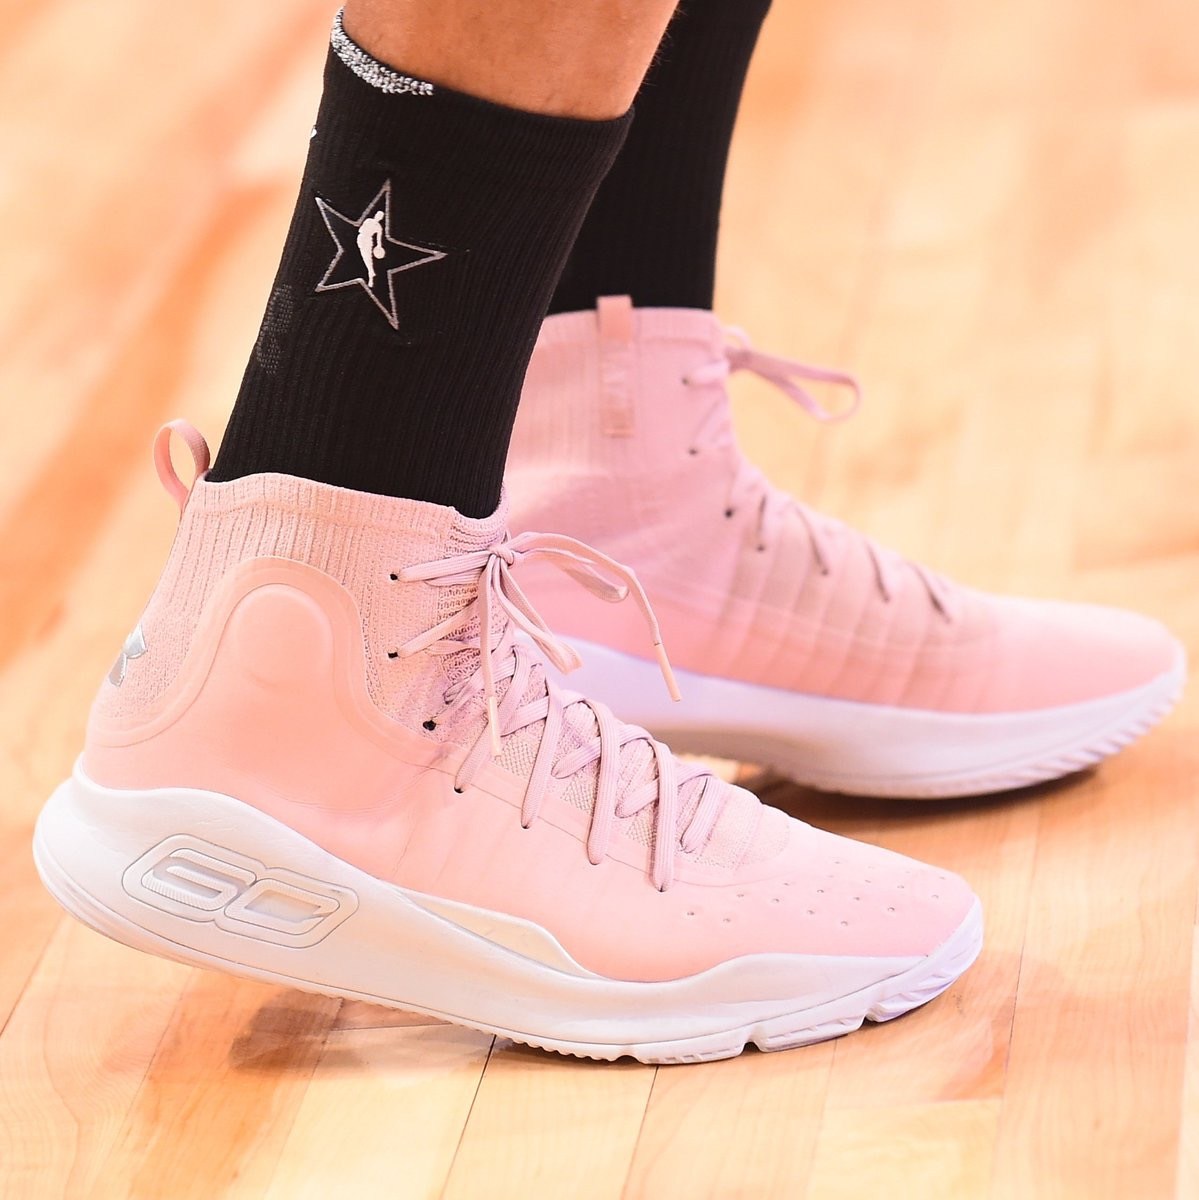 Stephen Curry - Under Armour Curry 4